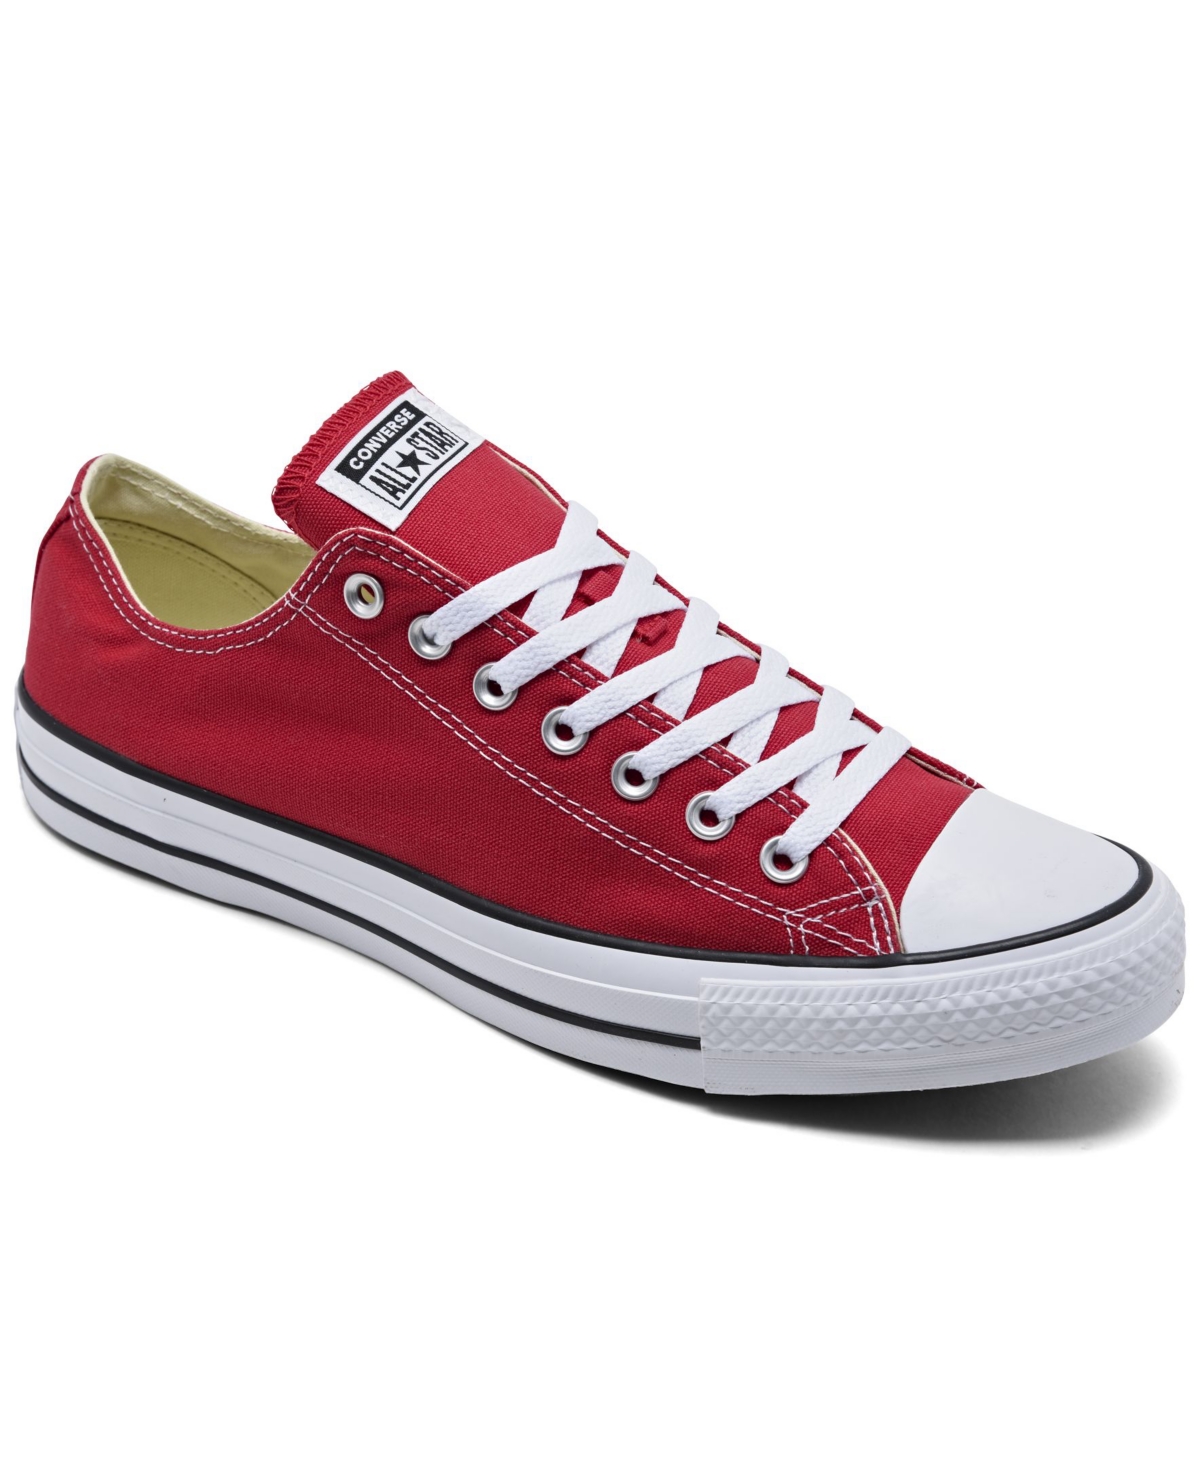 UPC 022859566629 product image for Converse Men's Chuck Taylor Low Top Sneakers from Finish Line | upcitemdb.com